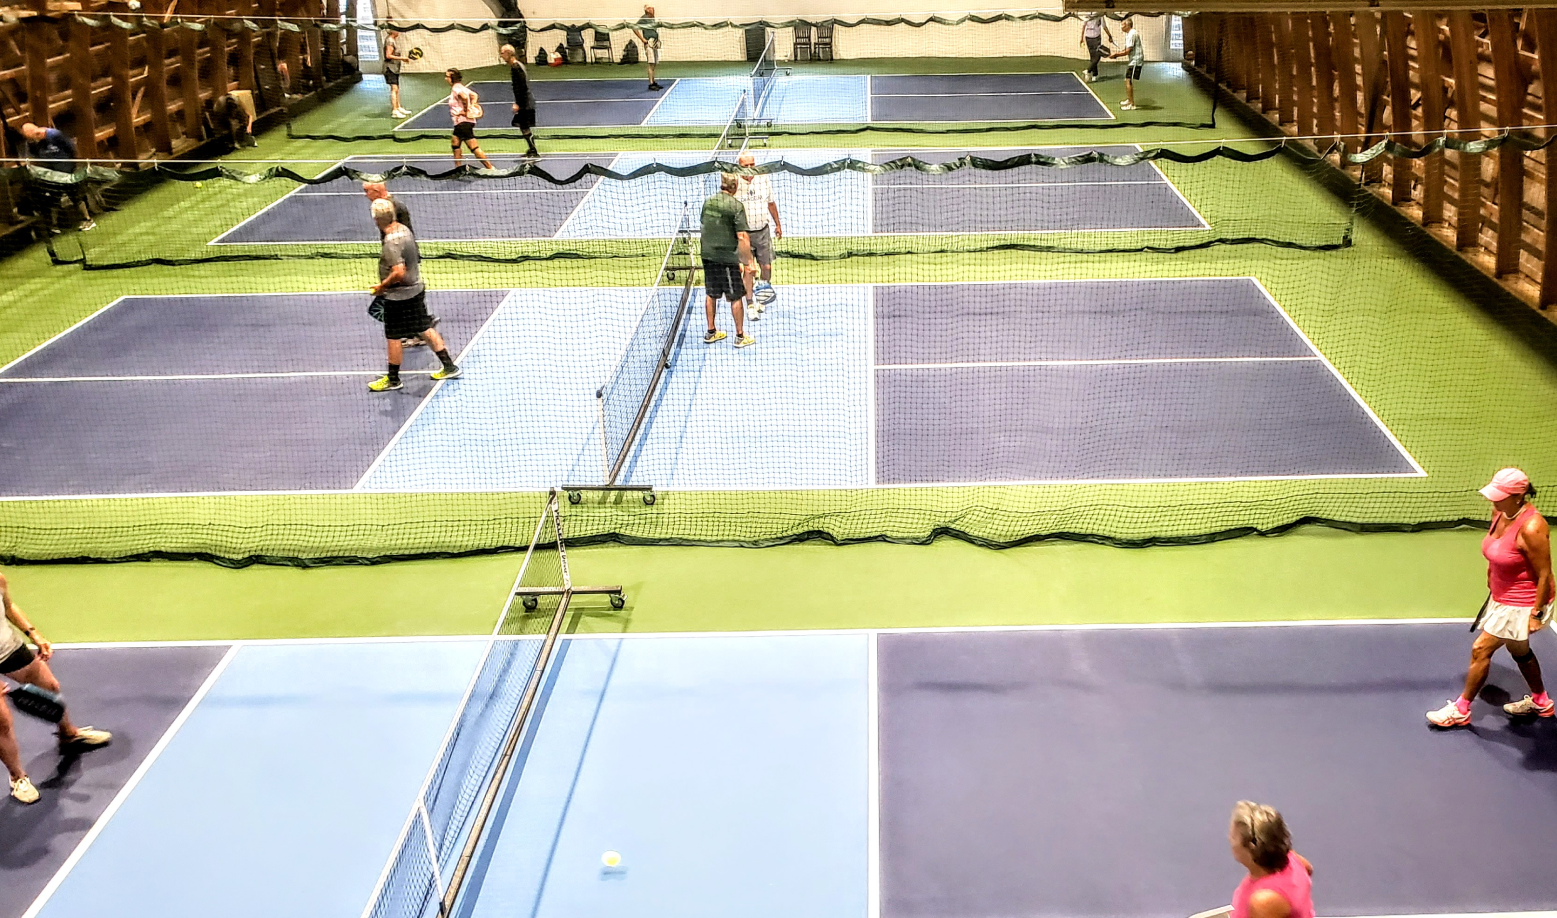 People playing on a pickleball court